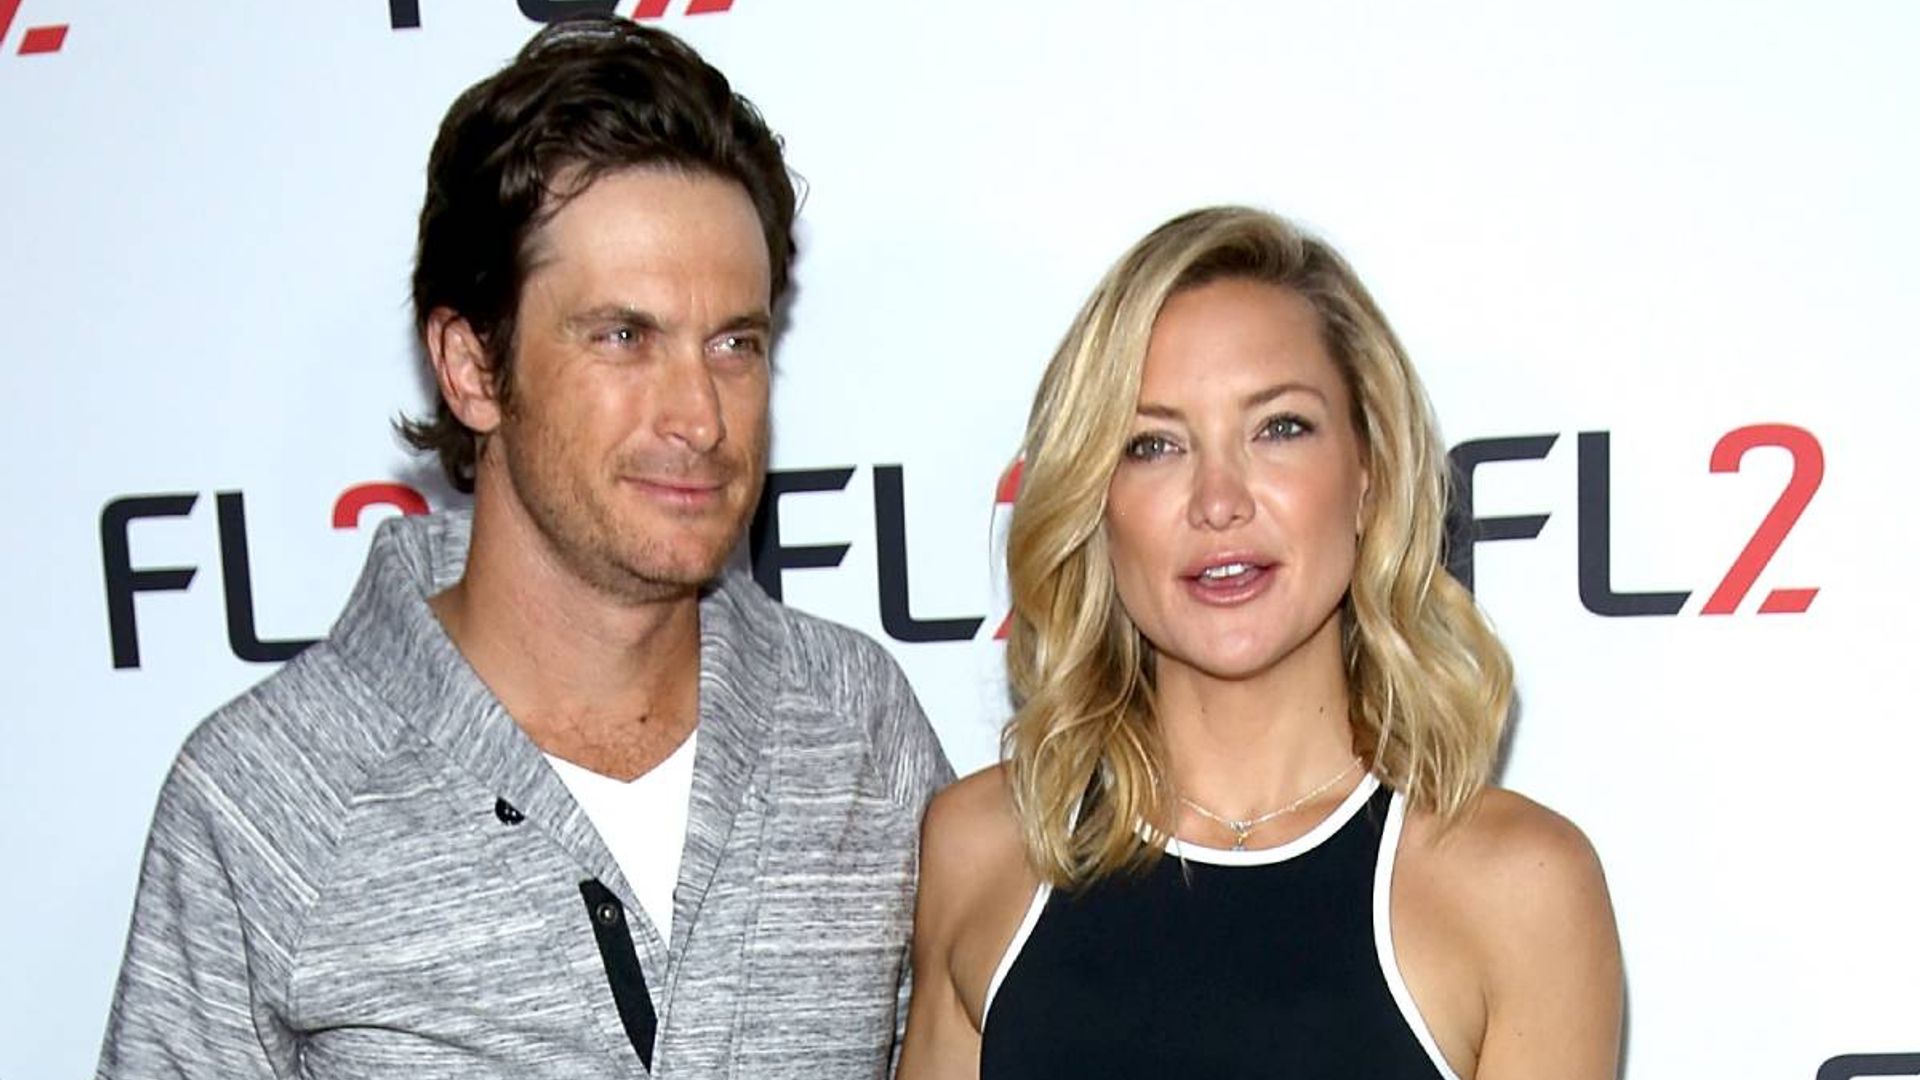 Kate Hudson reveals why she stopped inviting her brother Oliver Hudson to her star-studded parties